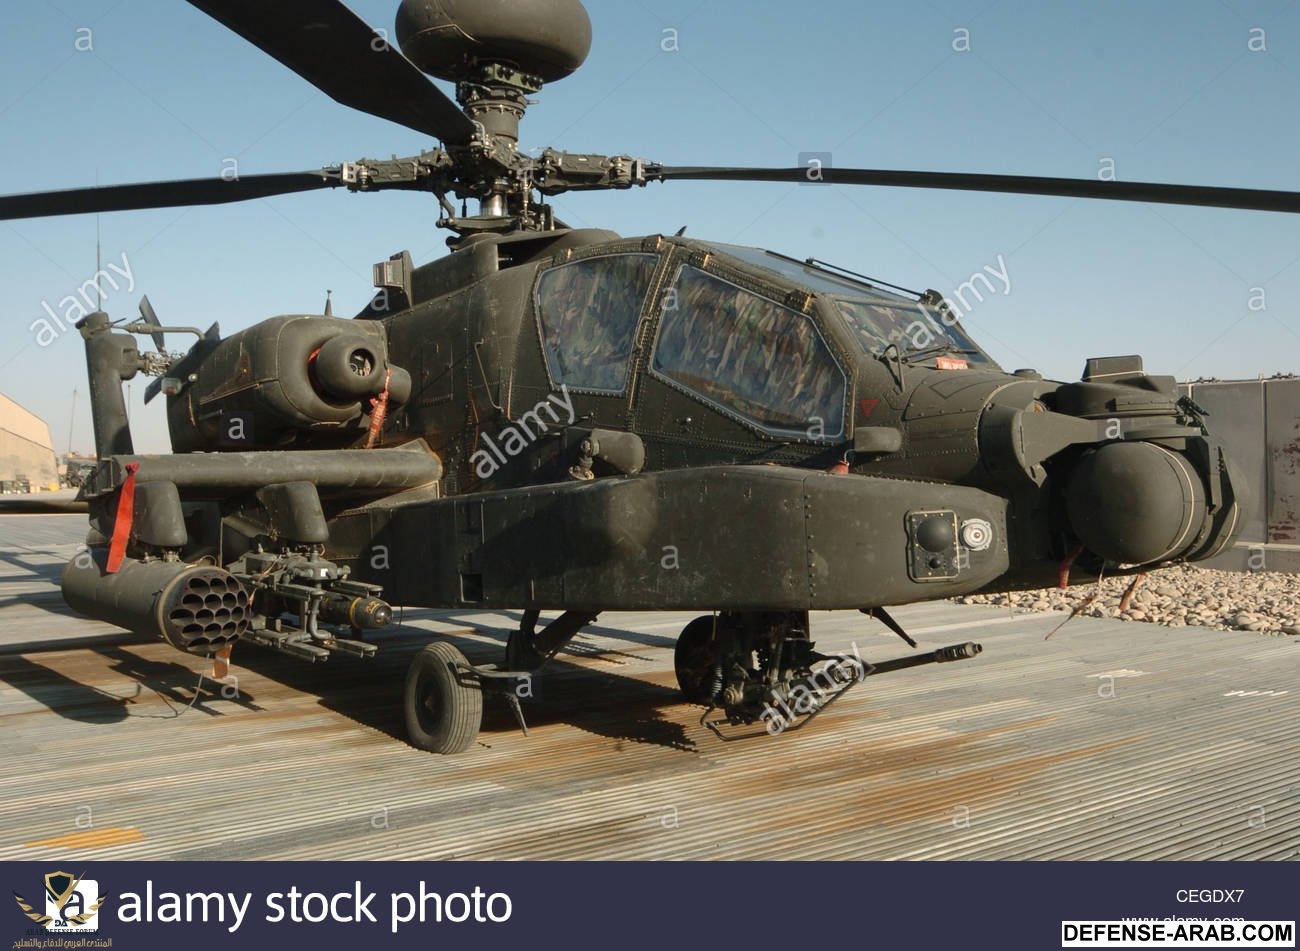 the-ah-64-apache-is-a-four-blade-attack-helicopter-with-reverse-tricycle-CEGDX7.jpg